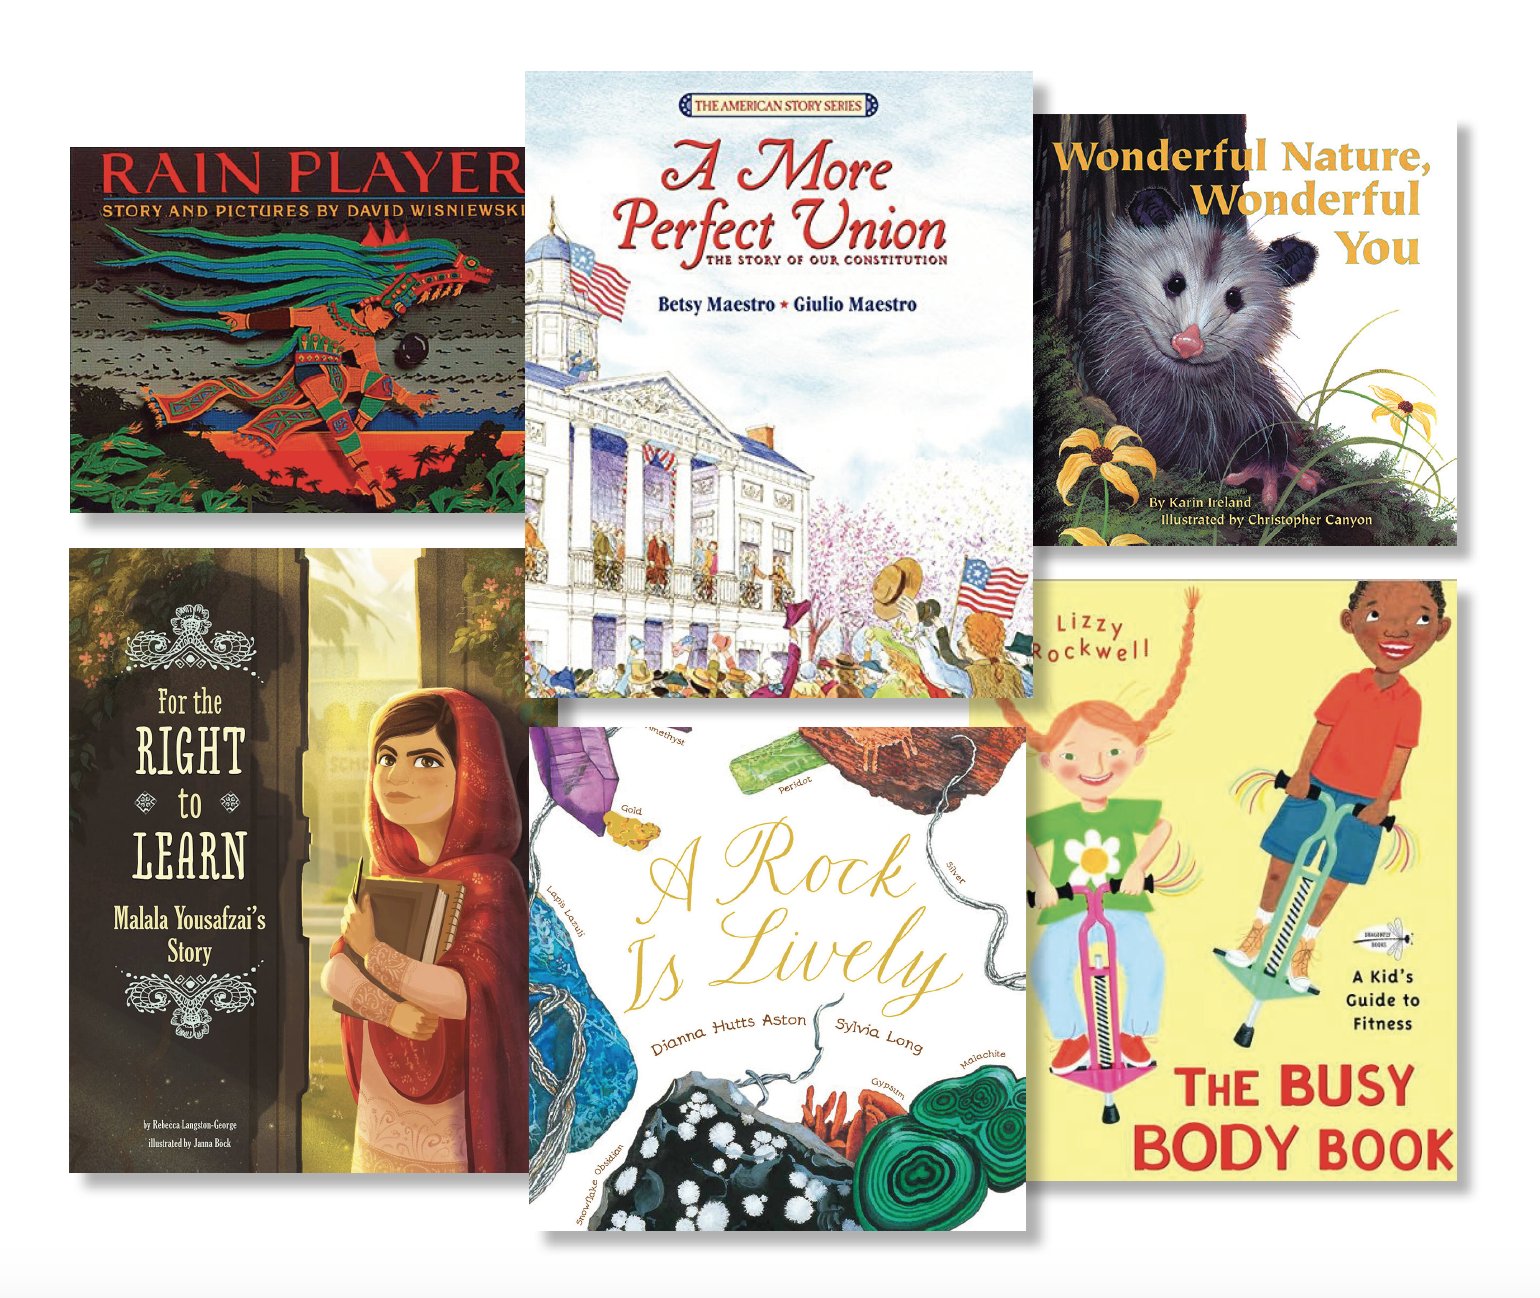 A collage of six diverse children's book covers featuring themes of nature, science, history, and biographies.